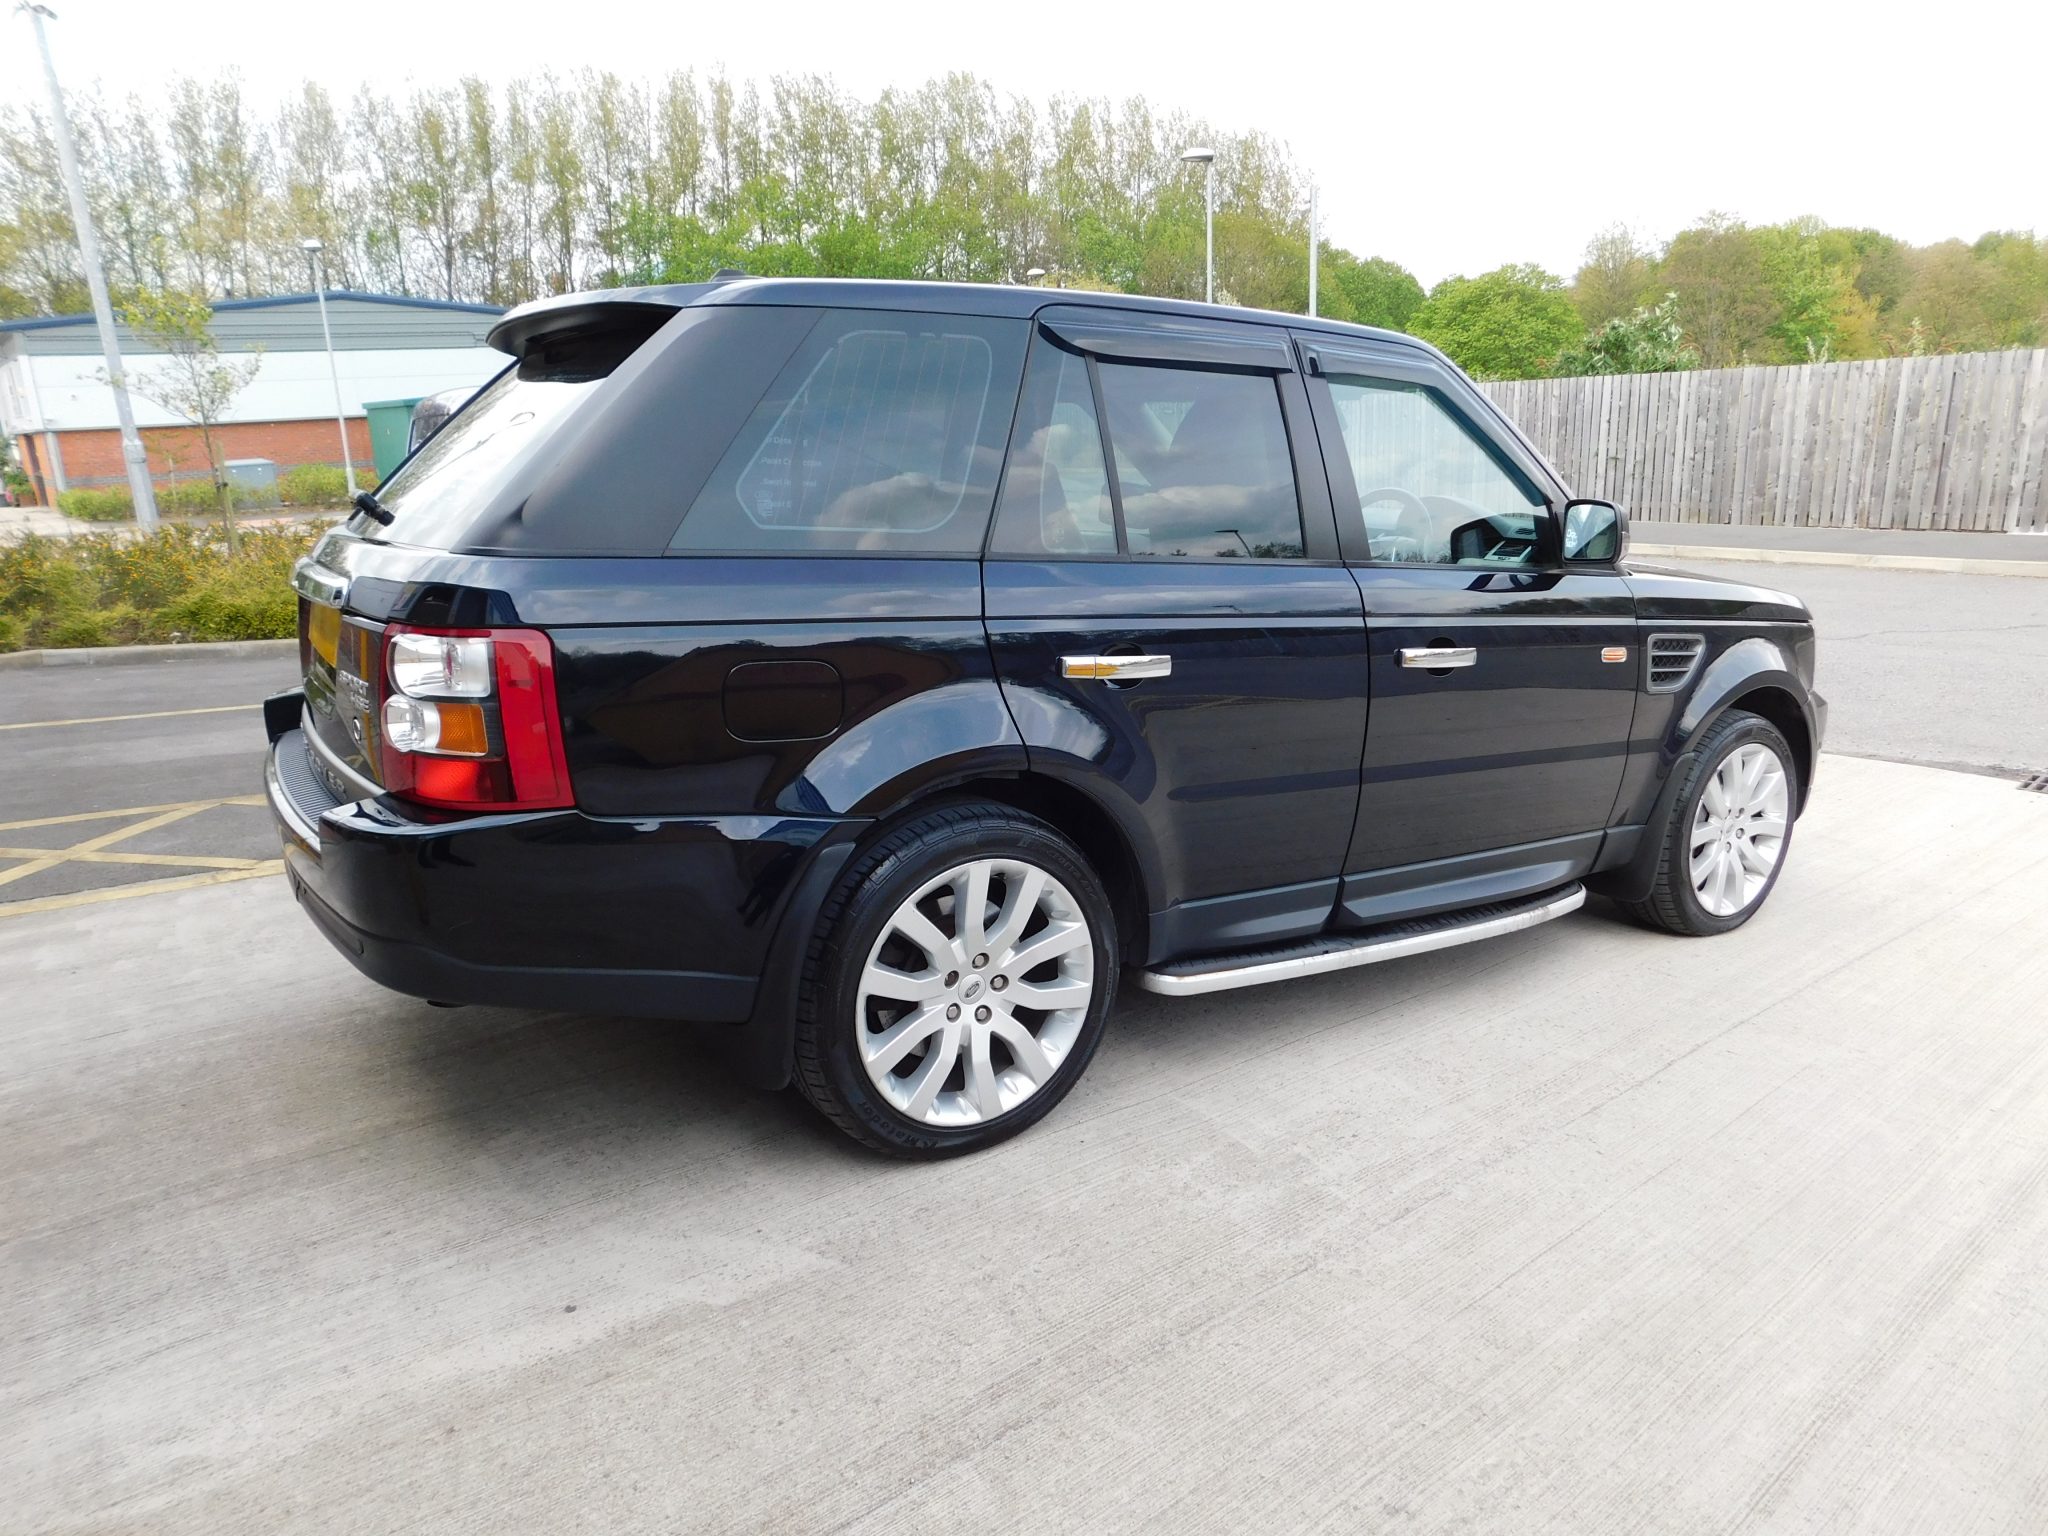 Range Rover Sport HSE after major paint correction